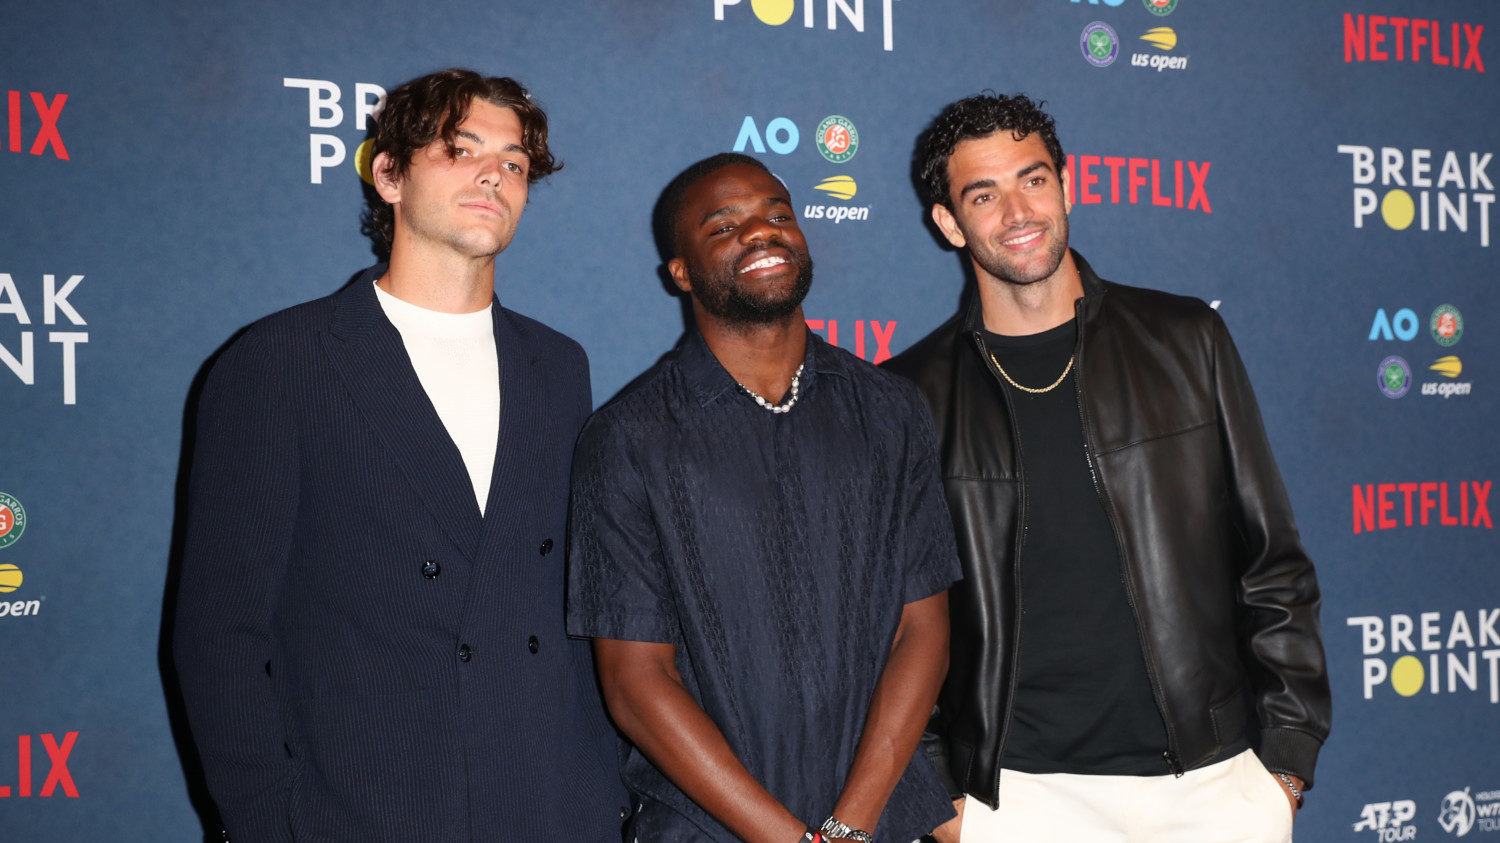 Netflix Curse Strikes Australian Open As All Players Featured In 'Break  Point' Are Out